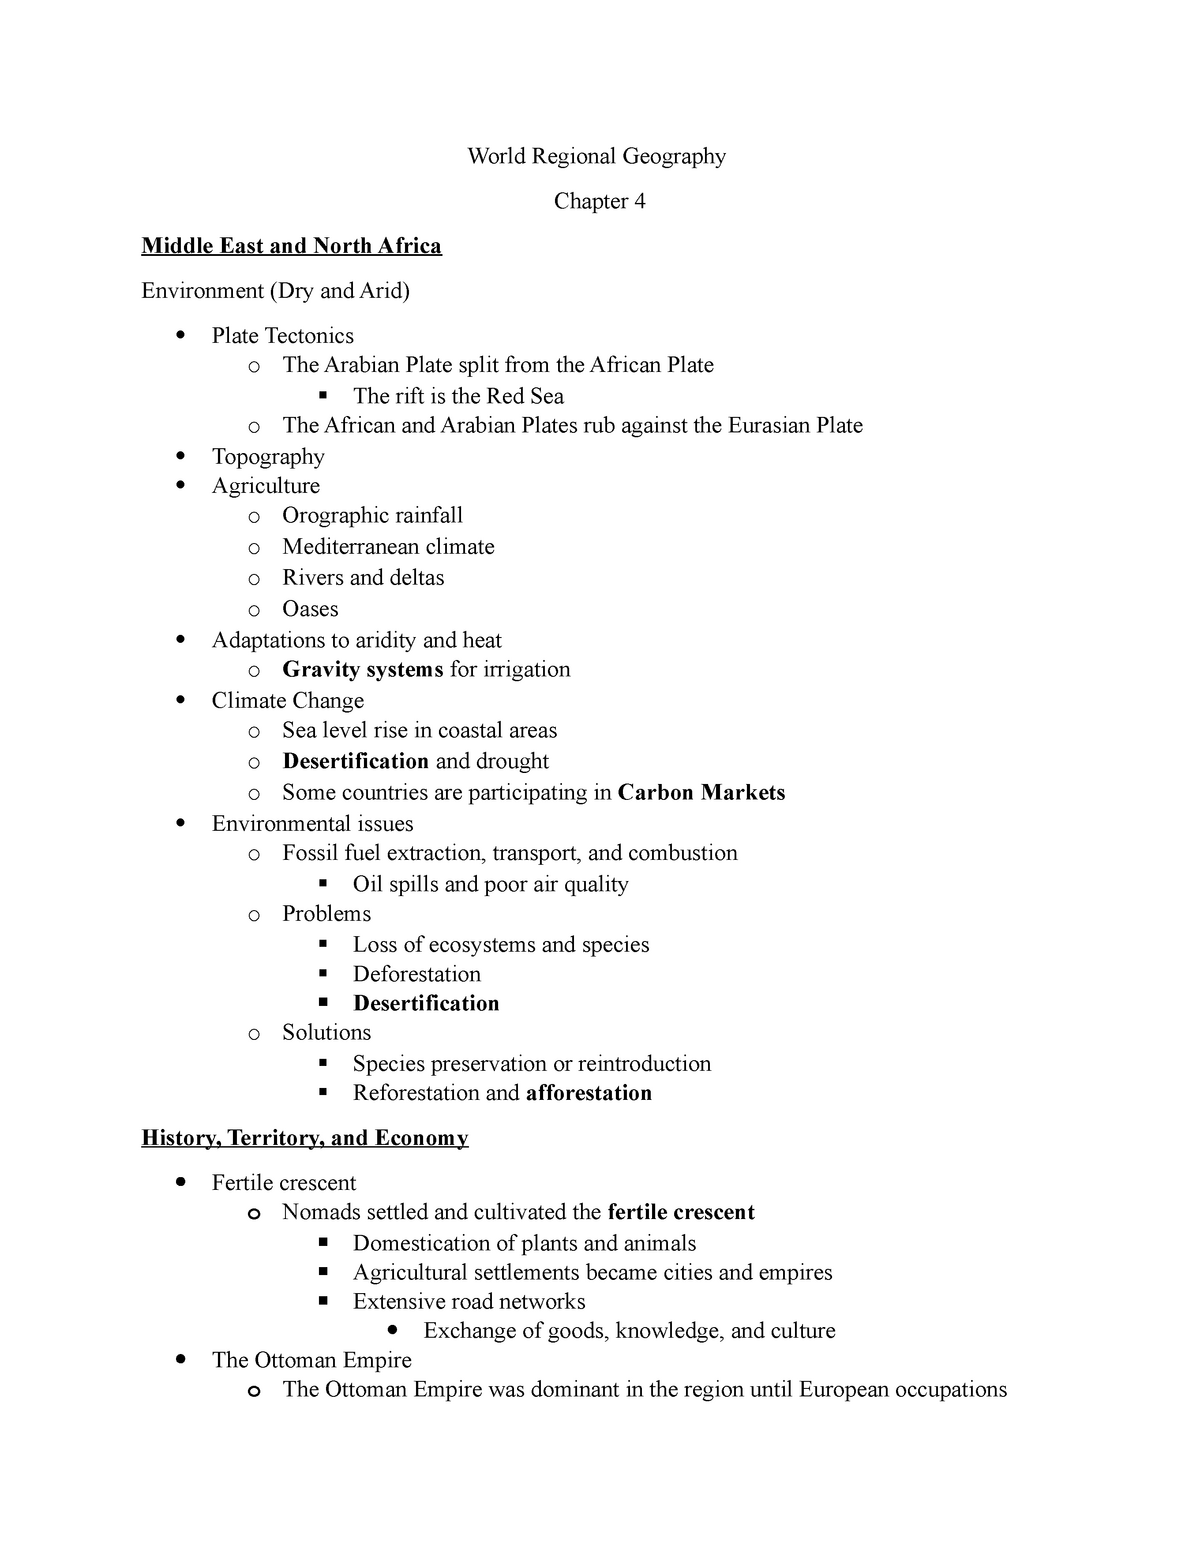 World Regional Geography Chapter 4 Notes World Regional Geography Chapter 4 Middle East And 3516